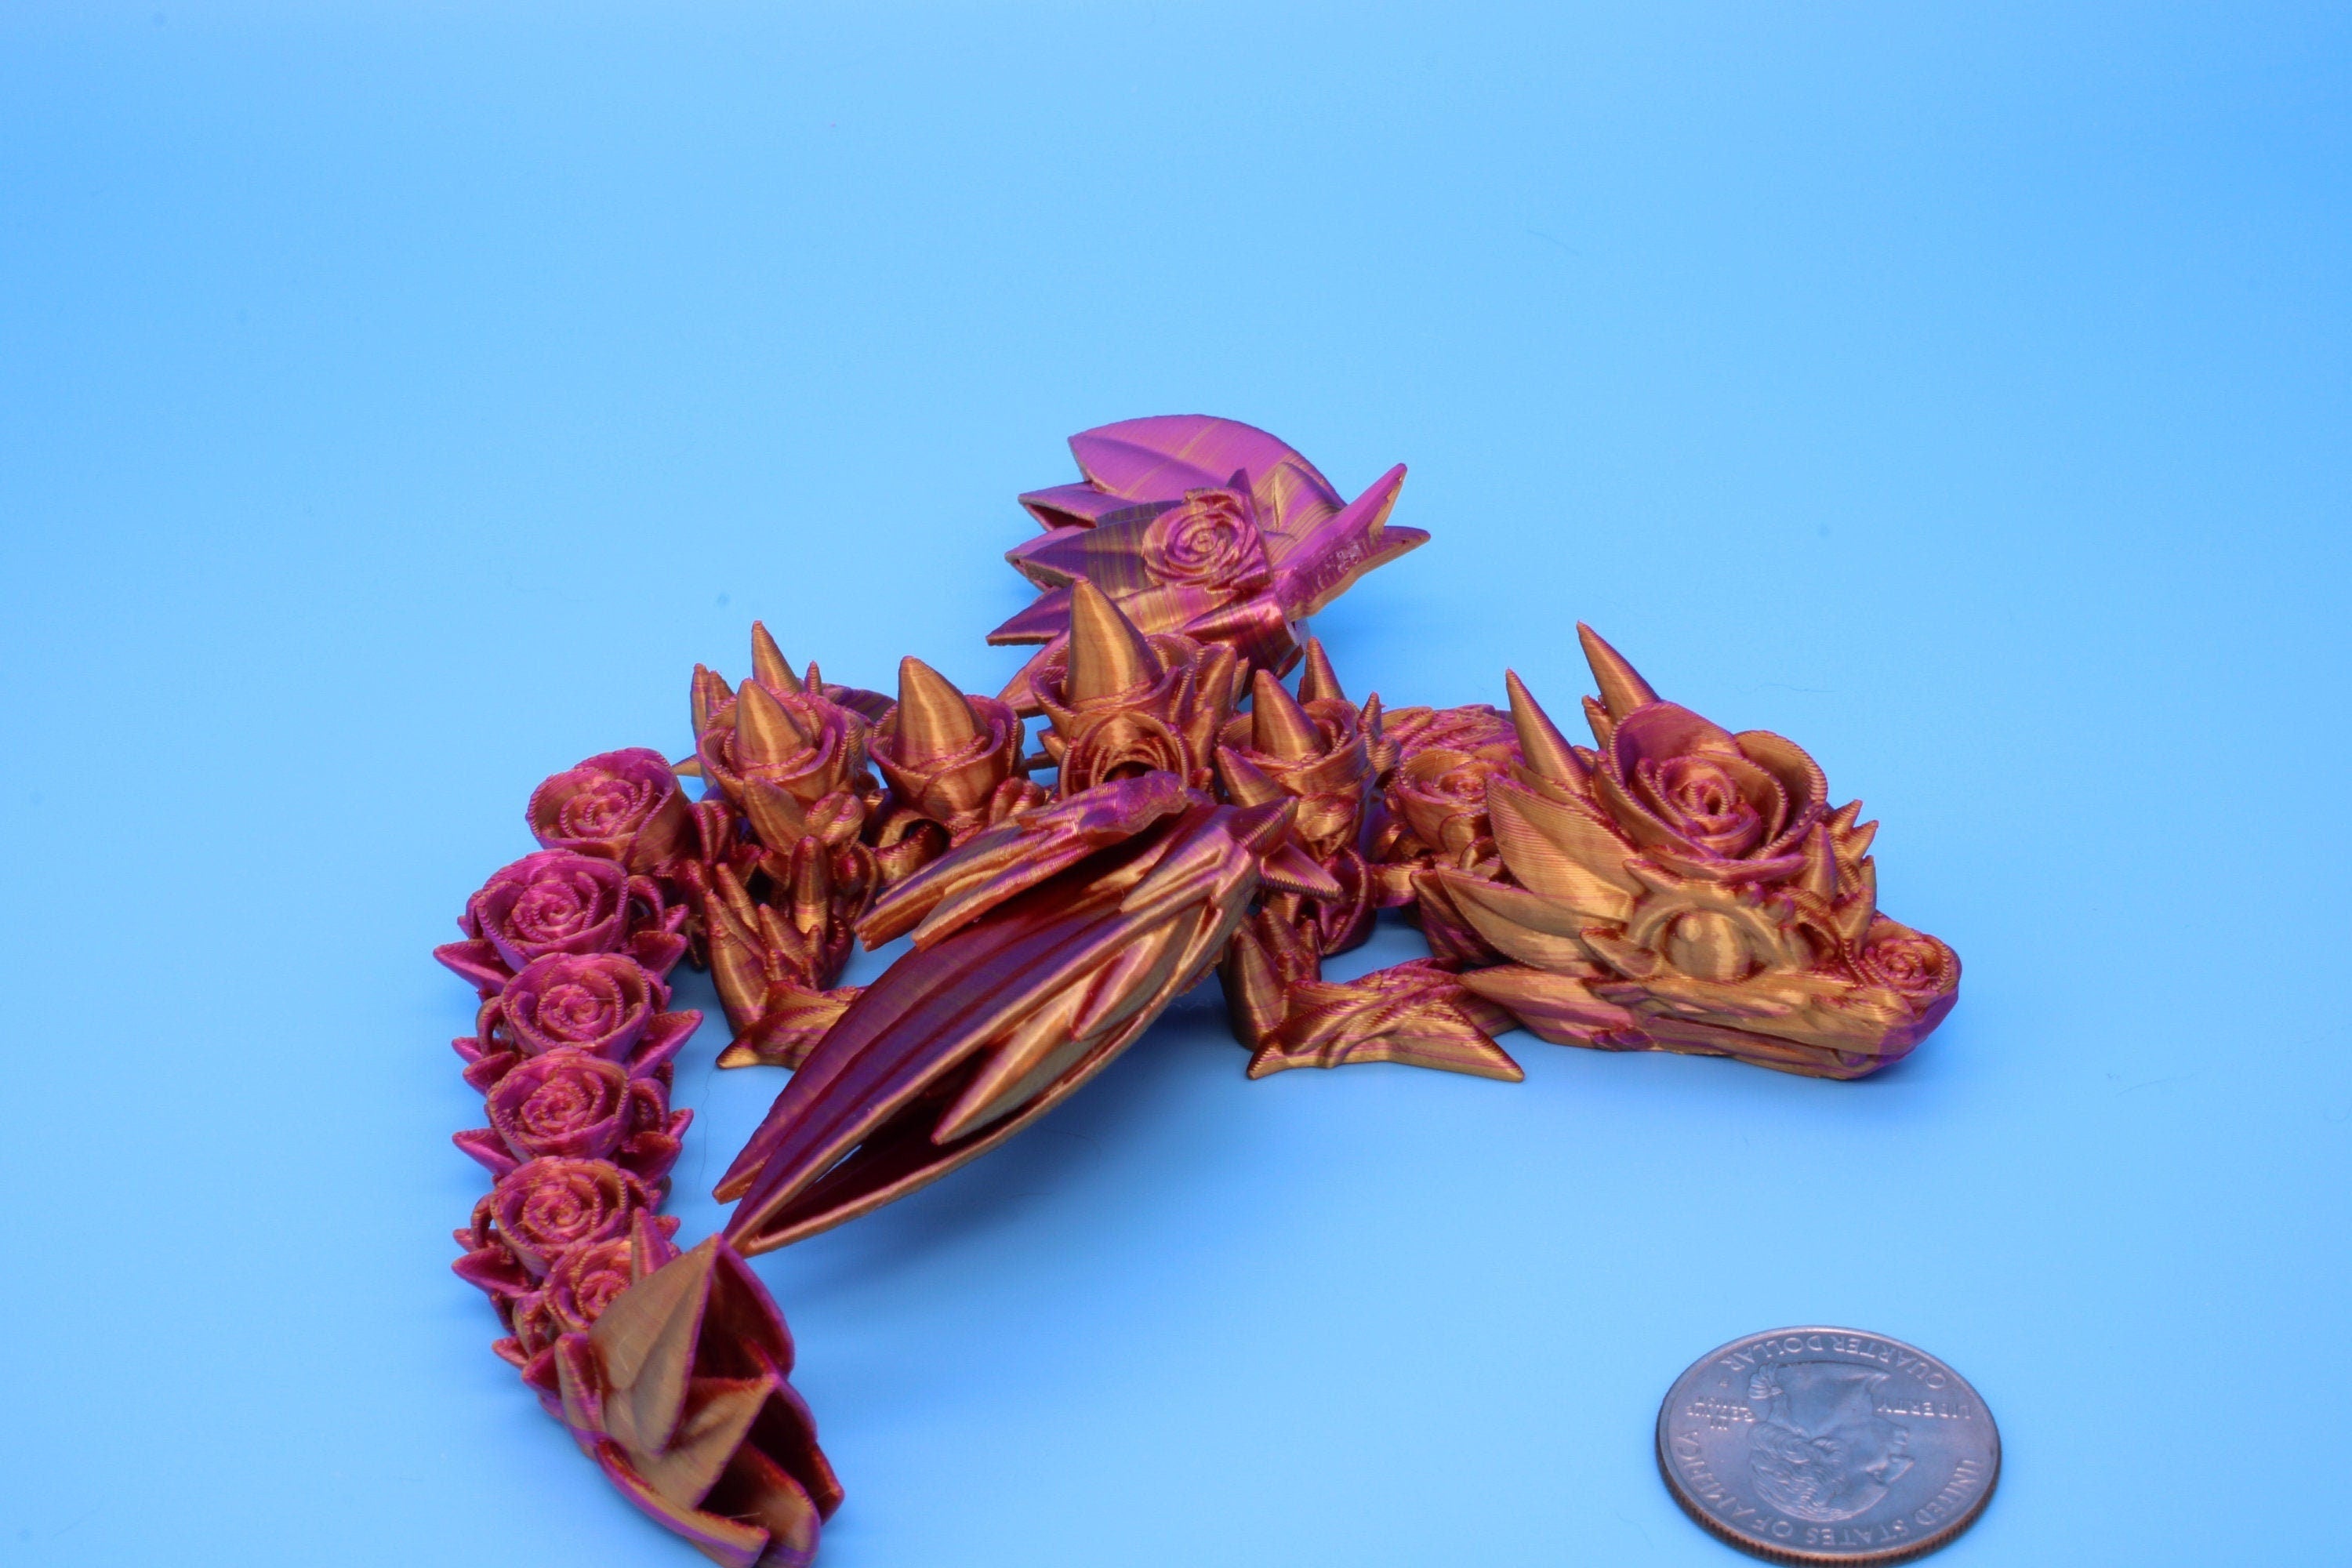 Miniature Baby Rose Wing Dragon | Pink & Gold | 3D printed articulating Toy Fidget | Flexi Toy 8.5 in. head to tail | Stress Relief Gift